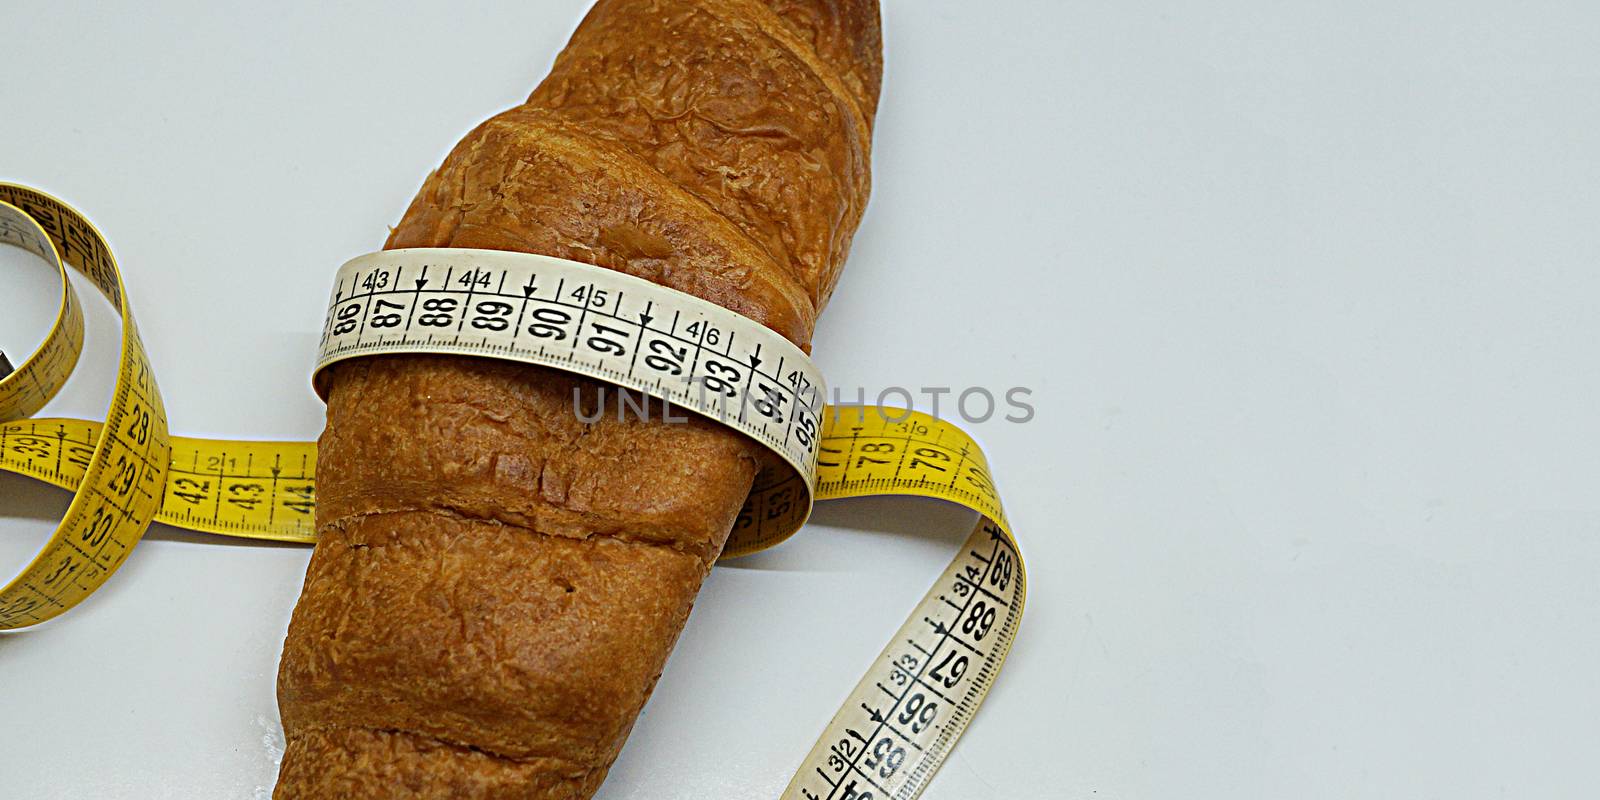 soft measuring ruler wrapped around a croissant as a symbol of unhealthy nutrition, copy space